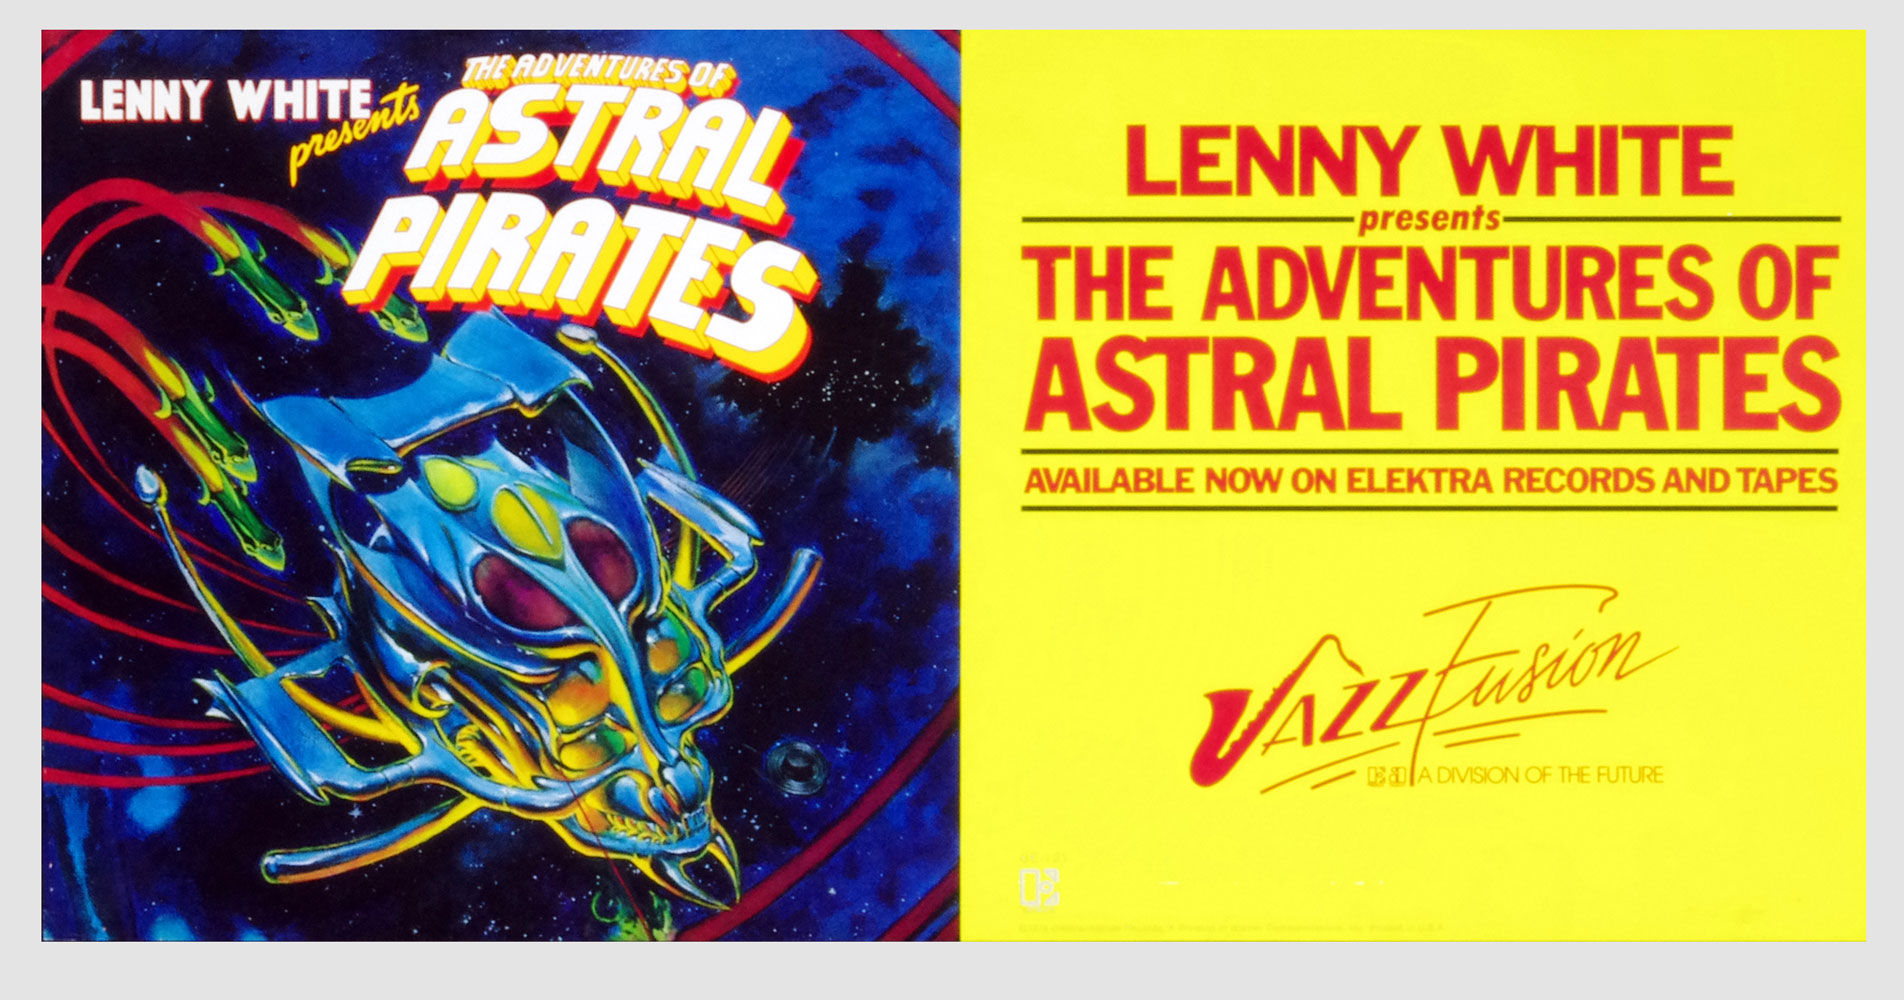 Lenny White Poster 1978 The Adventures of Astral Pirates Album Promotion